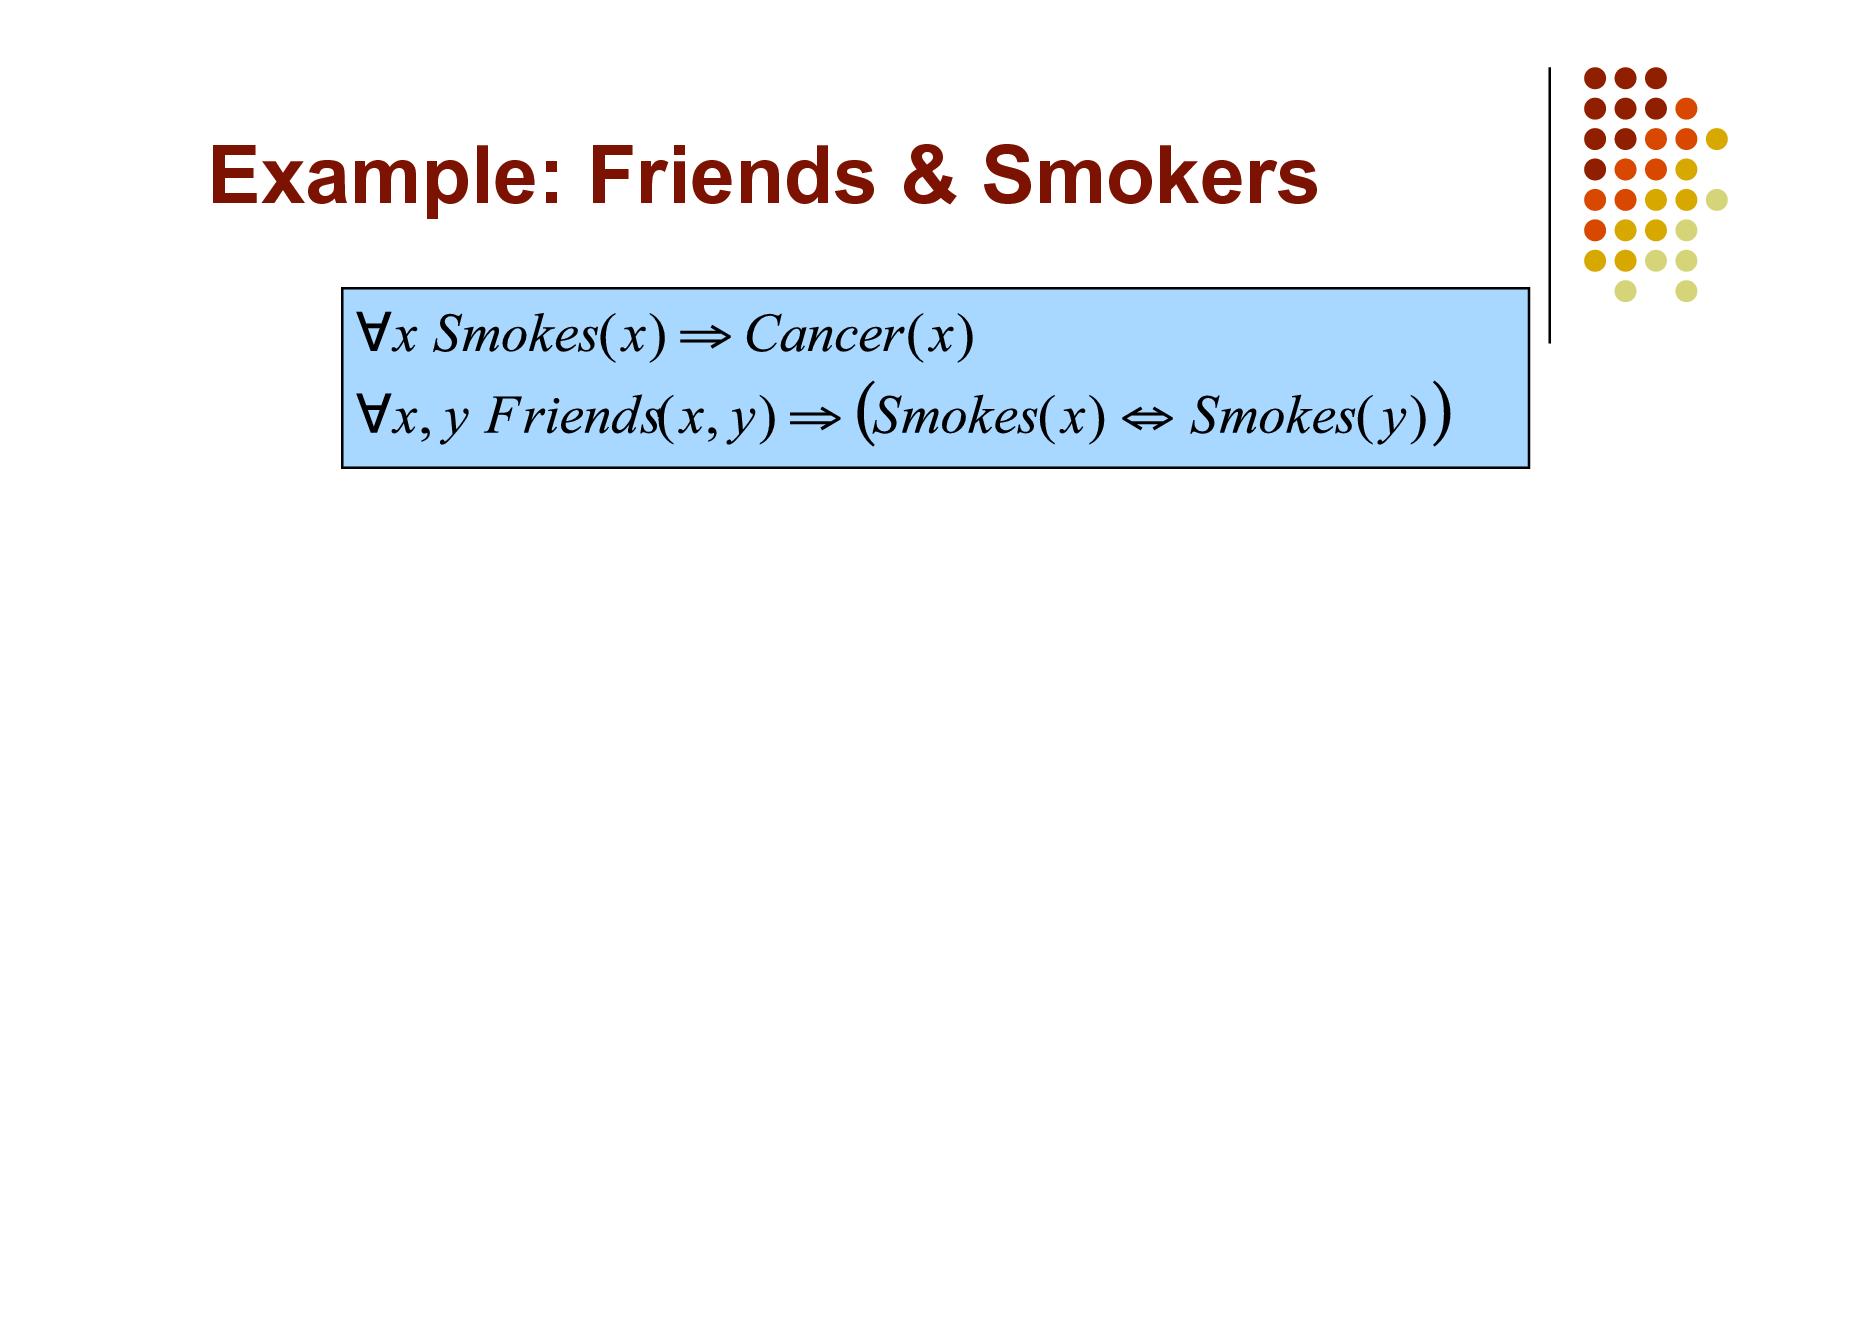 Slide: Example: Friends & Smokers

